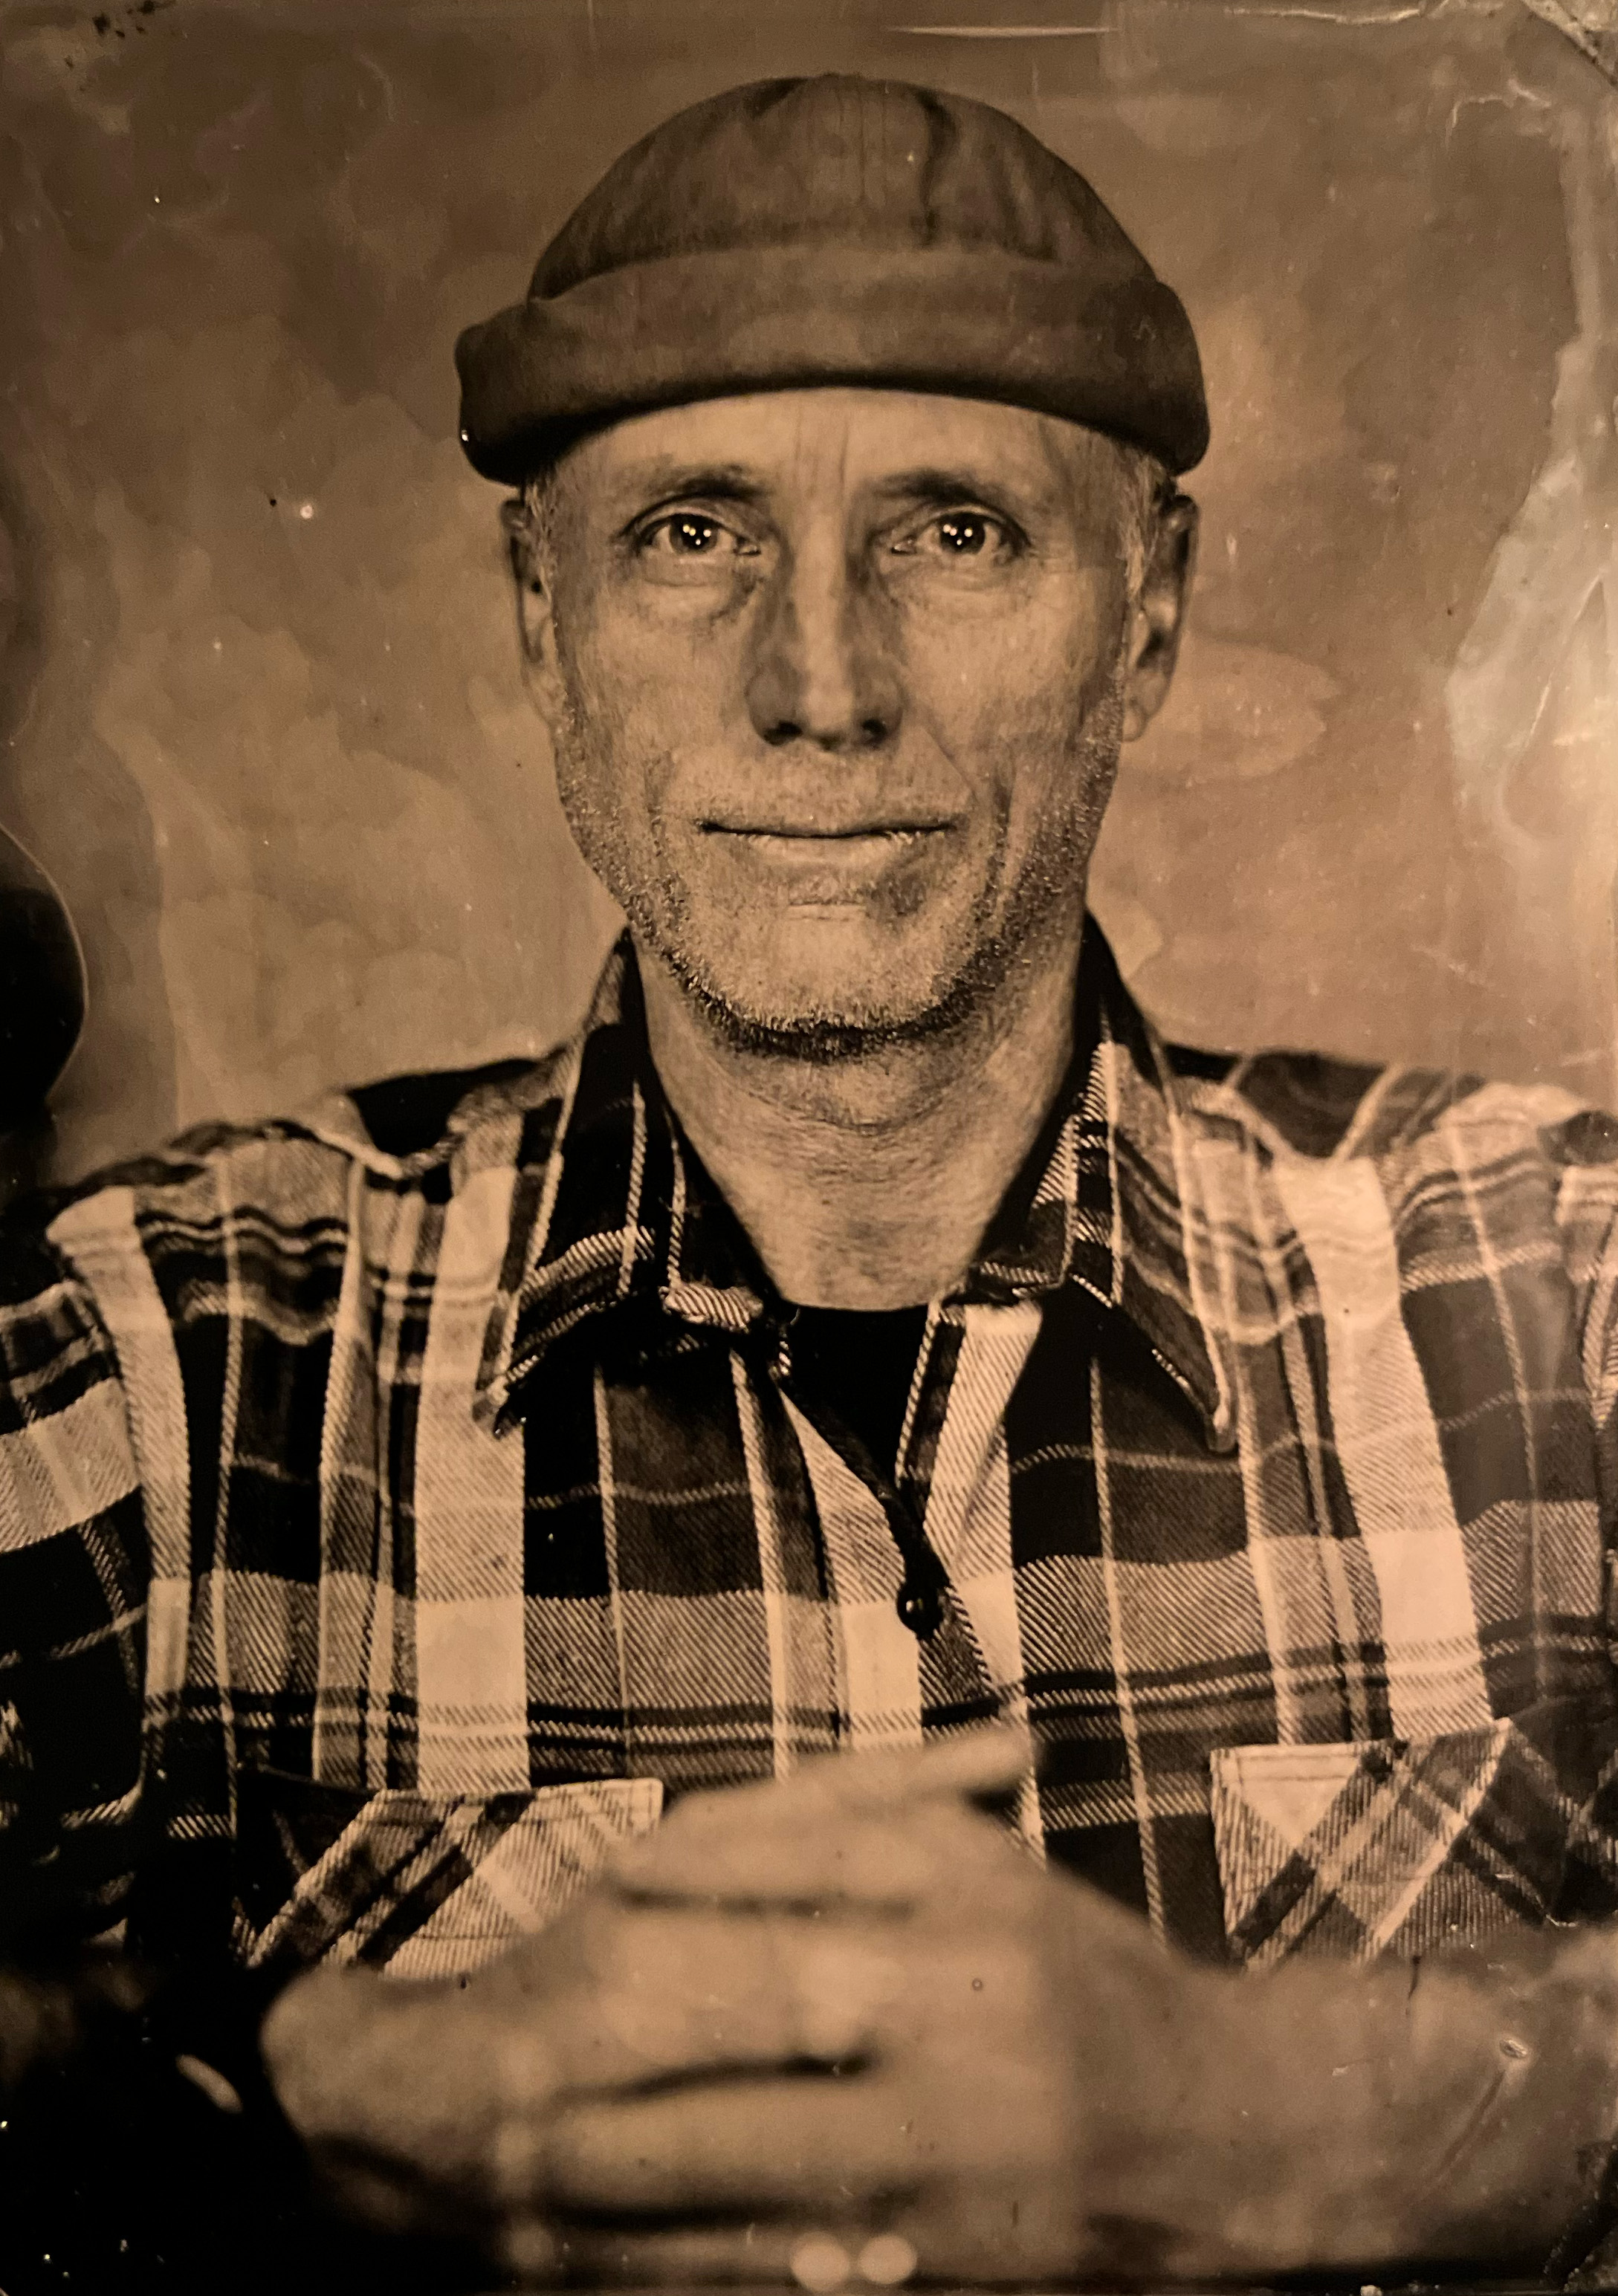 Paul Lebel in a cap photo on tin type traditional photograph in grey